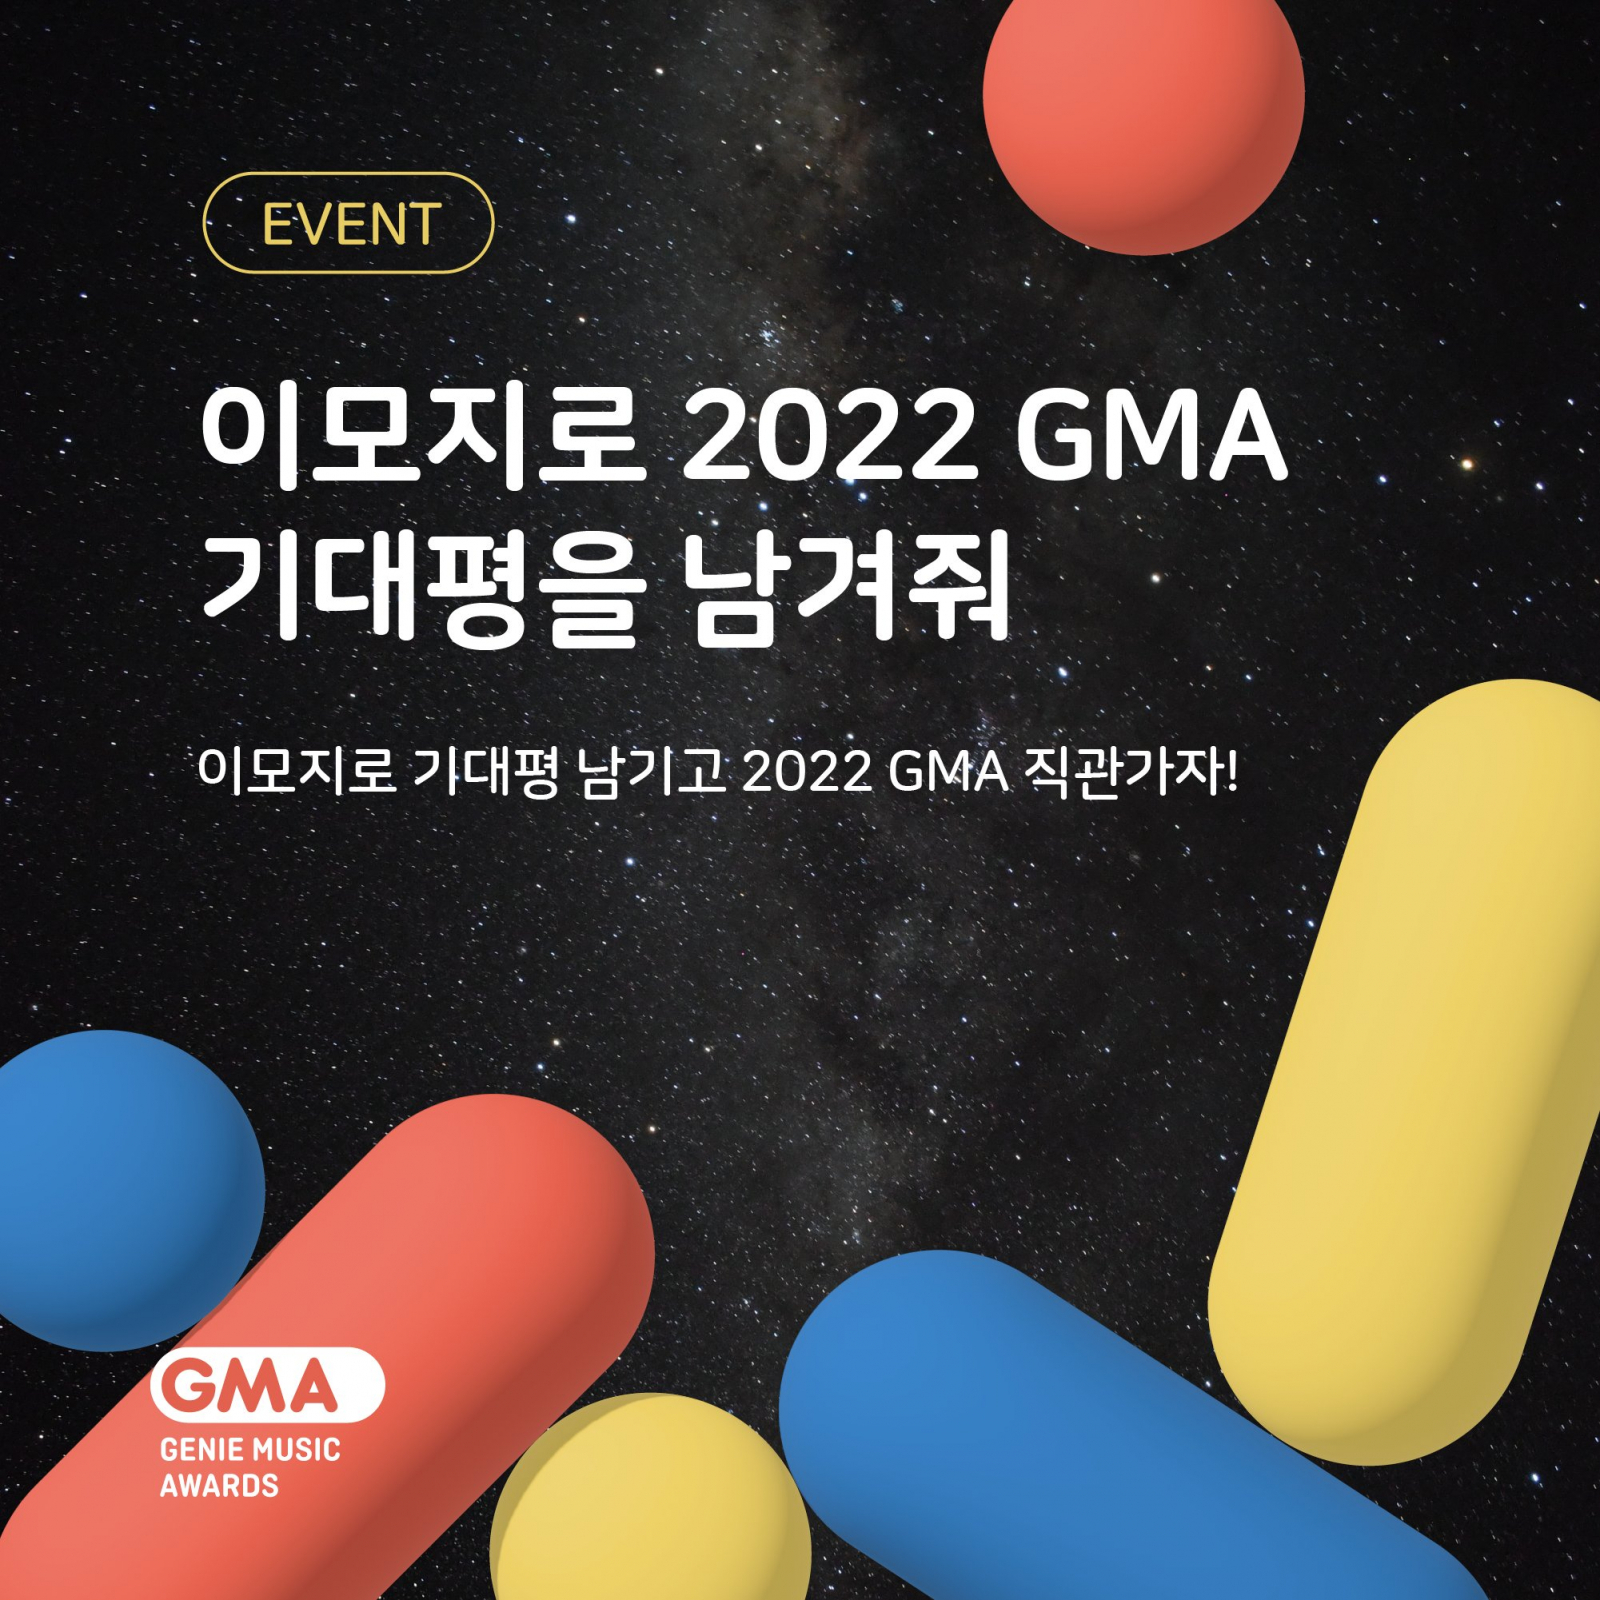 Genie Music Awards 2022 How to Watch, Date, Venue, Lineup, Nomination